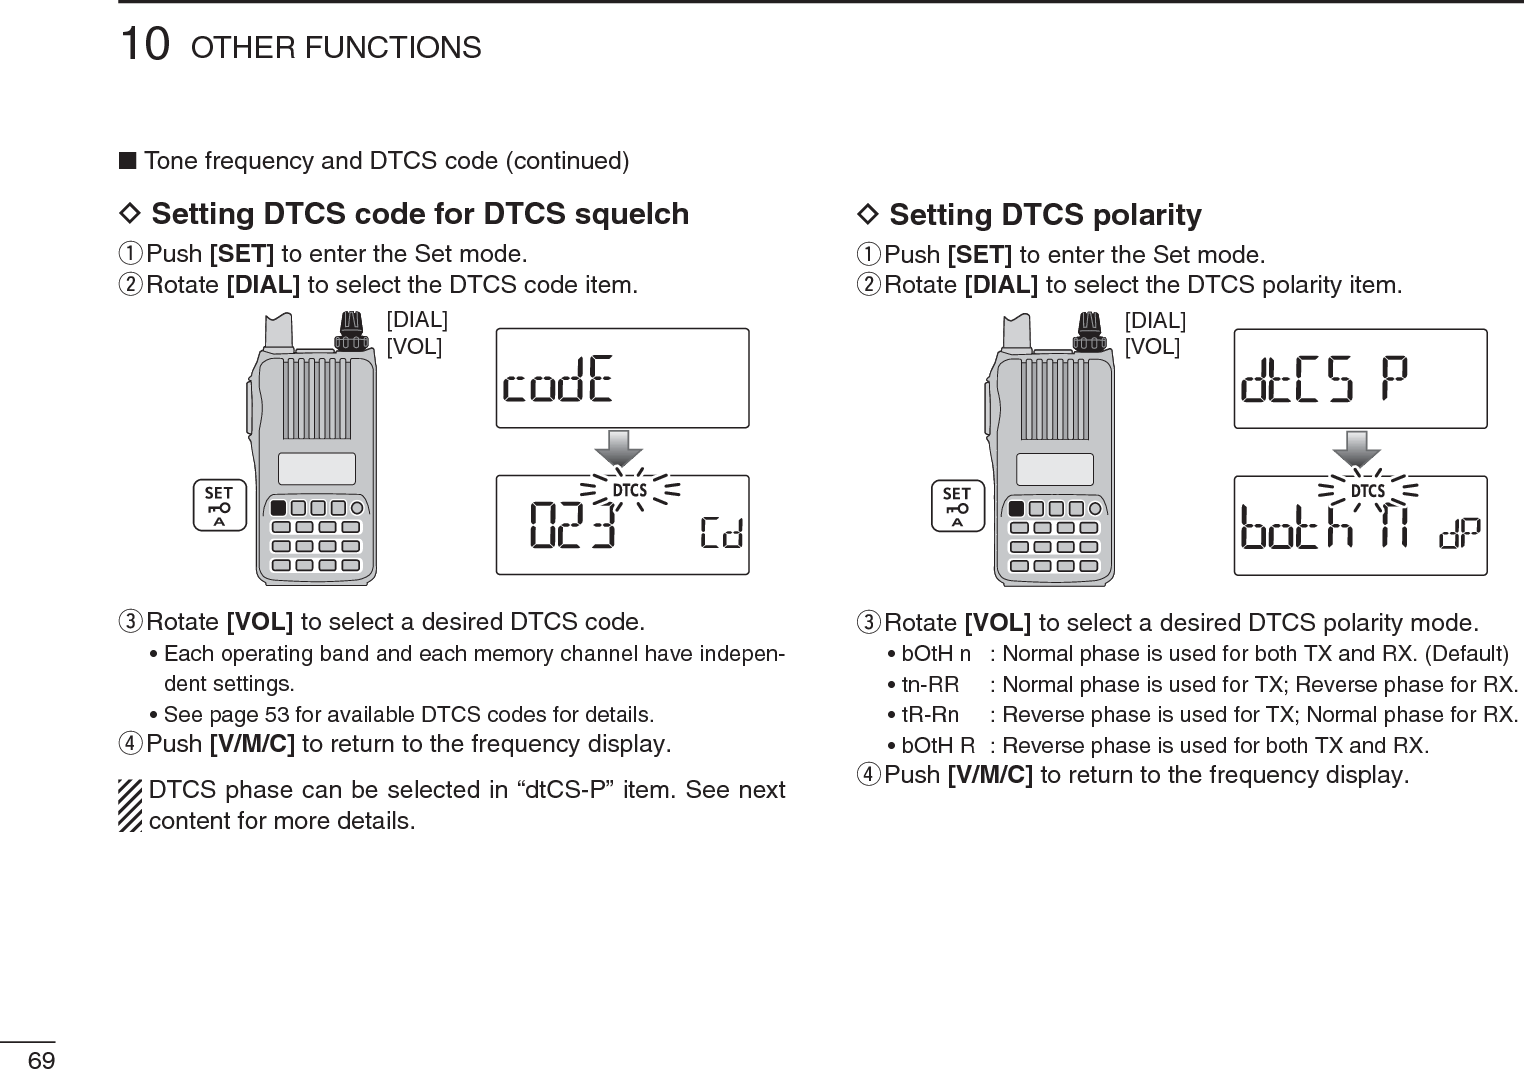 NTone frequency and DTCS code (continued)DSetting DTCS code for DTCS squelchq  Push [SET] to enter the Set mode.w  Rotate [DIAL] to select the DTCS code item.[VOL][DIAL]e  Rotate [VOL] to select a desired DTCS code.• Each operating band and each memory channel have indepen-dent settings.• See page 53 for available DTCS codes for details.rPush [V/M/C] to return to the frequency display.DTCS phase can be selected in “dtCS-P” item. See next content for more details.DSetting DTCS polarityq  Push [SET] to enter the Set mode.w  Rotate [DIAL] to select the DTCS polarity item.[VOL][DIAL]e  Rotate [VOL] to select a desired DTCS polarity mode.• bOtH n : Normal phase is used for both TX and RX. (Default)• tn-RR : Normal phase is used for TX; Reverse phase for RX.• tR-Rn : Reverse phase is used for TX; Normal phase for RX.• bOtH R : Reverse phase is used for both TX and RX.rPush [V/M/C] to return to the frequency display.6910 OTHER FUNCTIONS